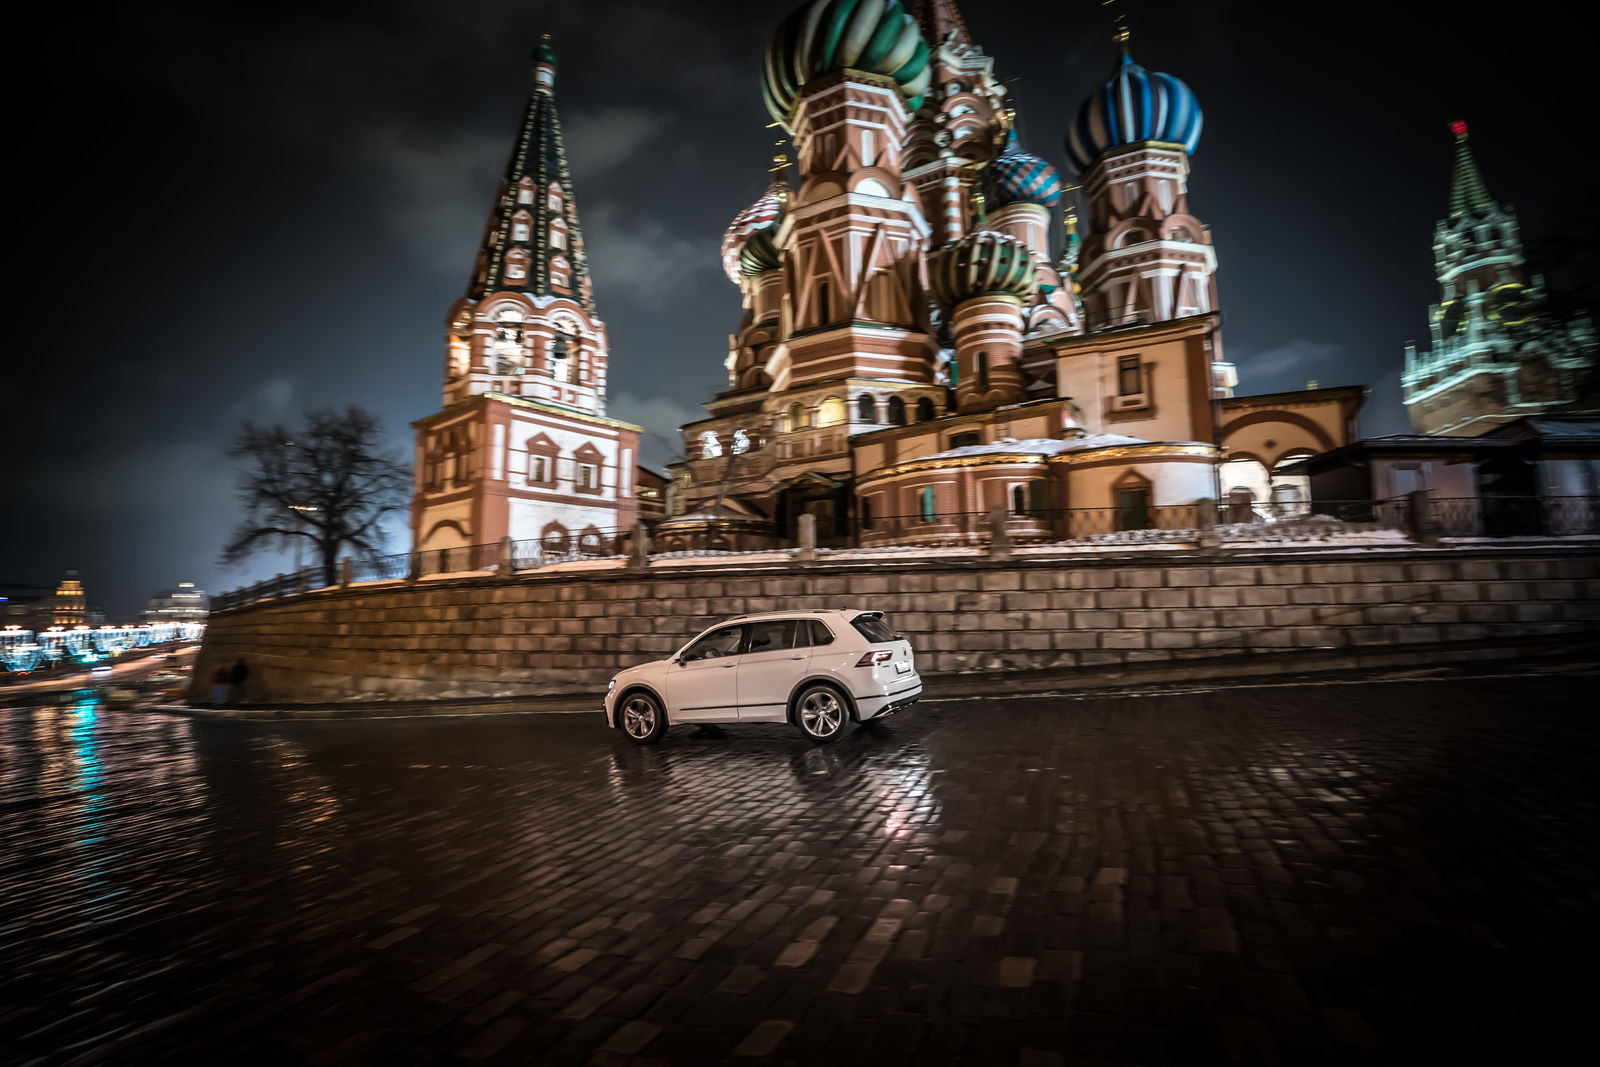 Story: A Moscow night with flashing lights